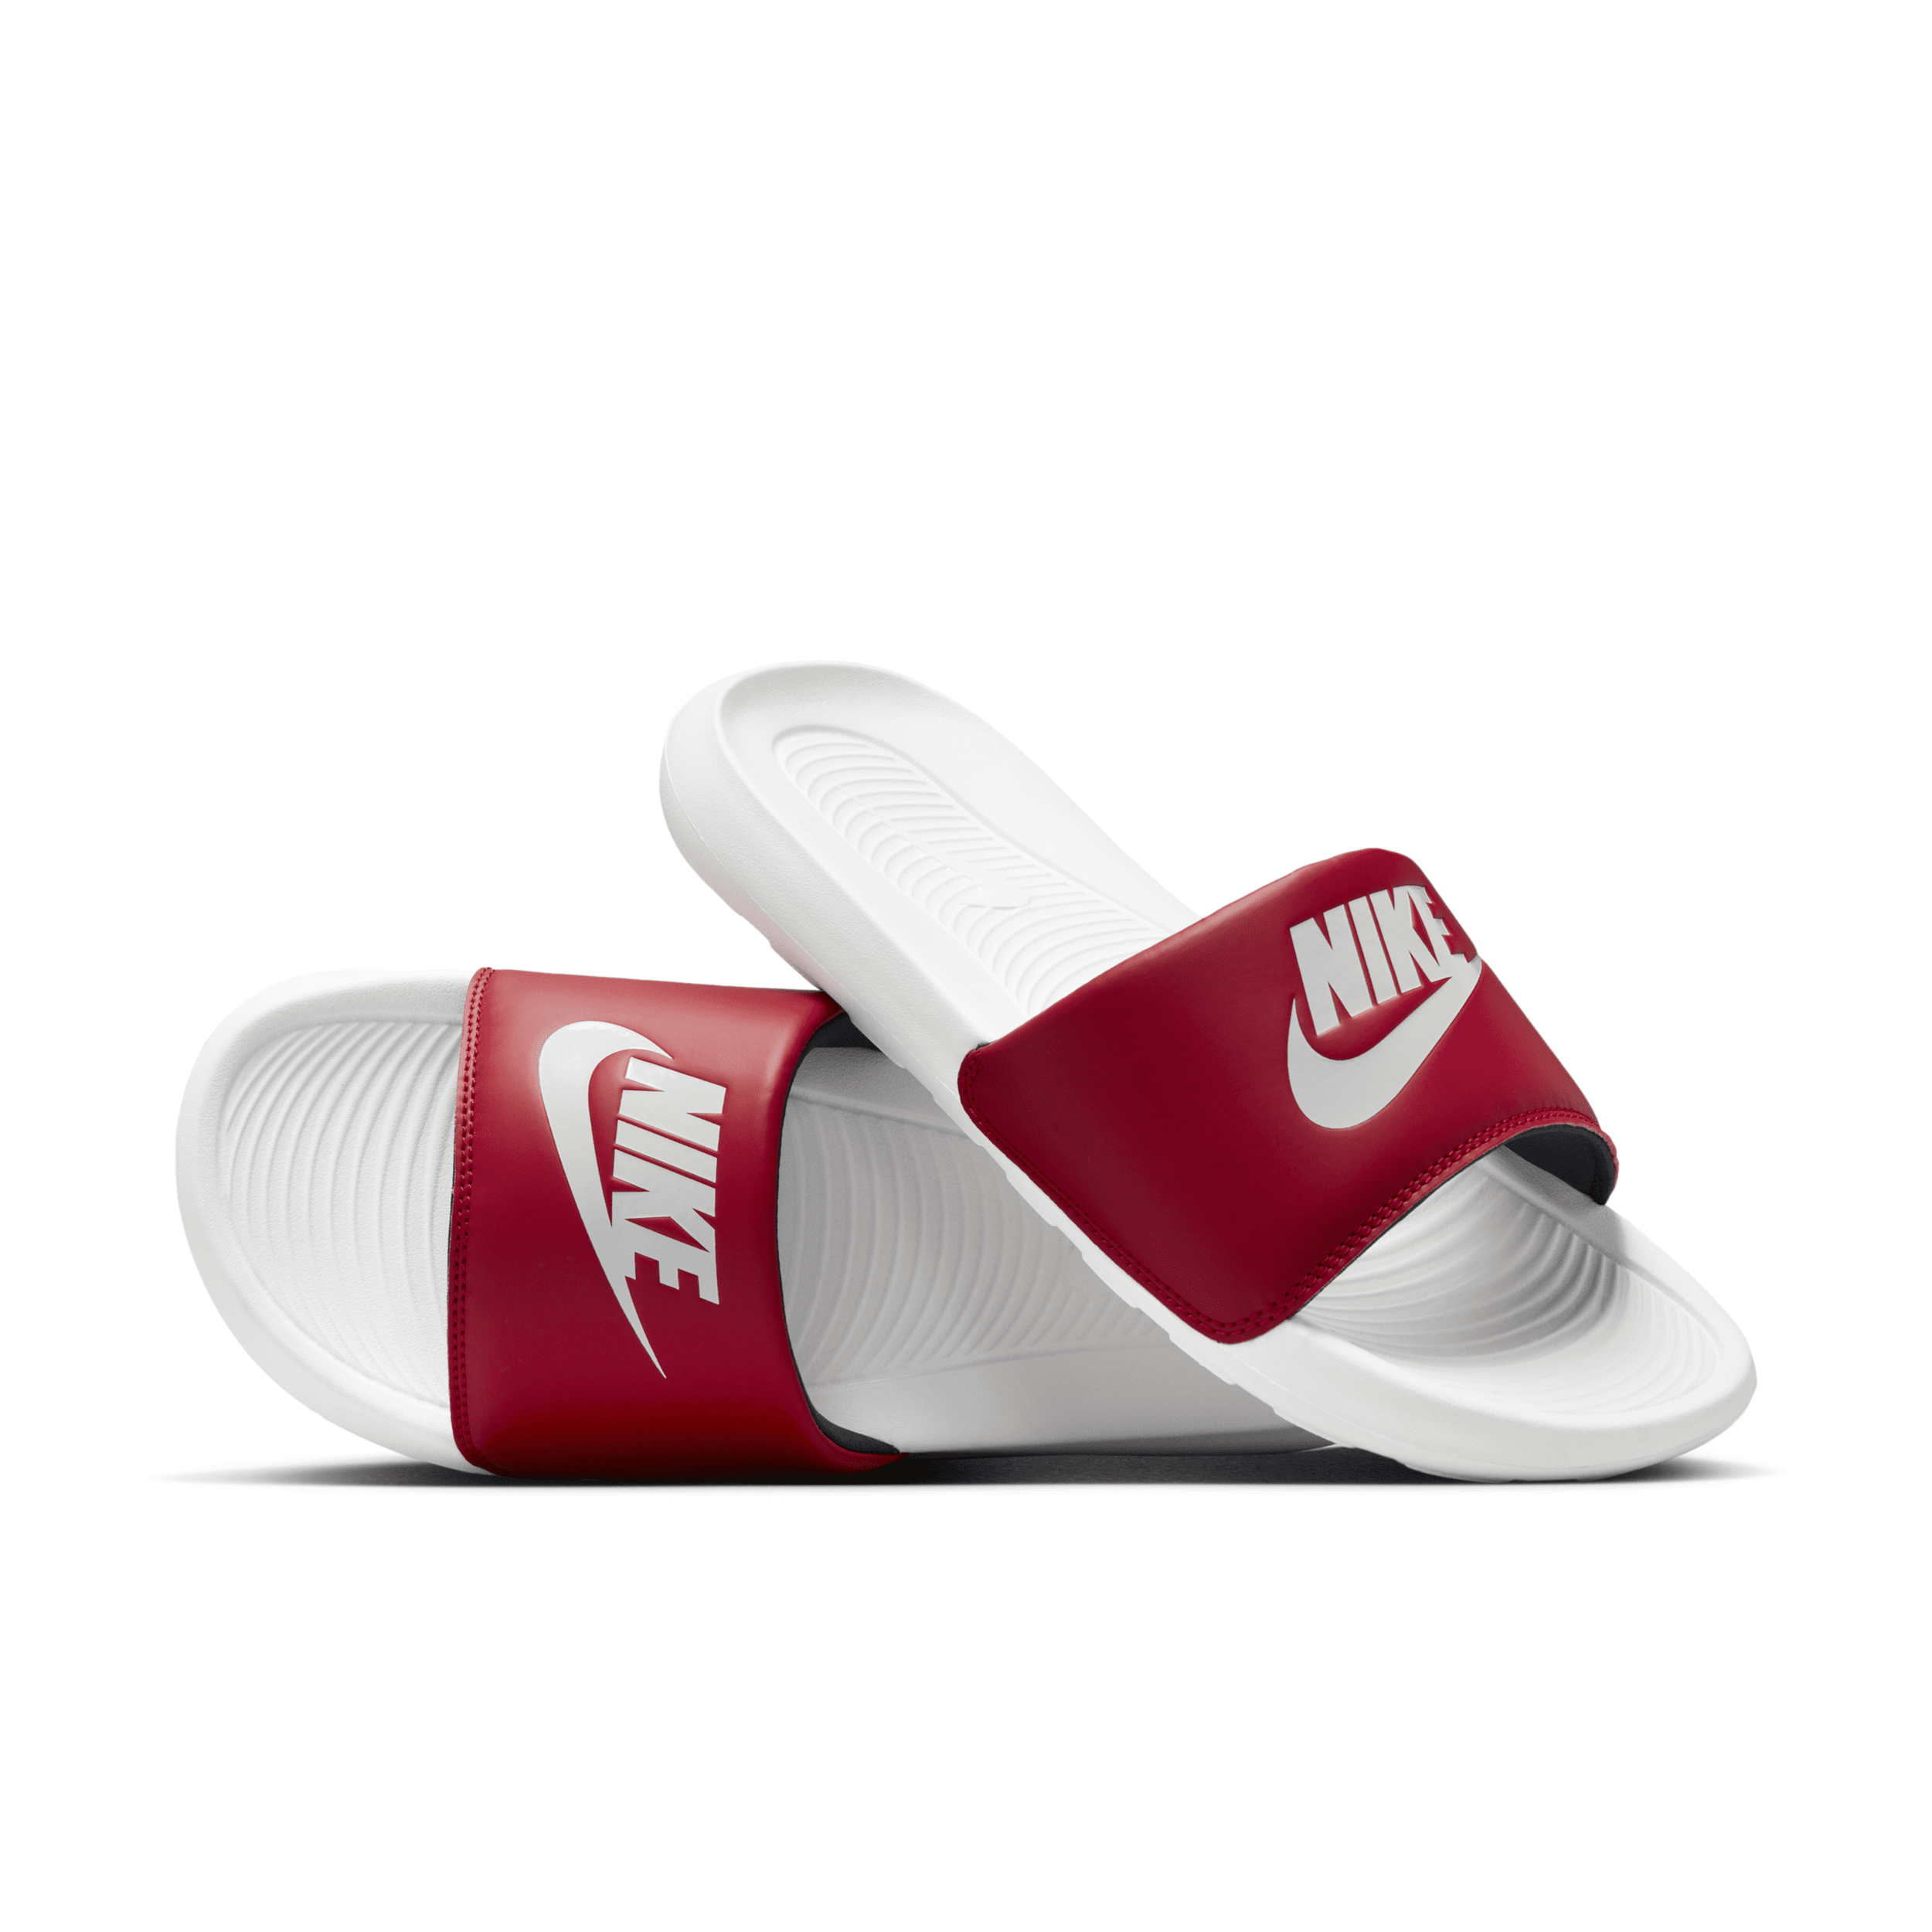 Nike Men's Victori One Slides In Red